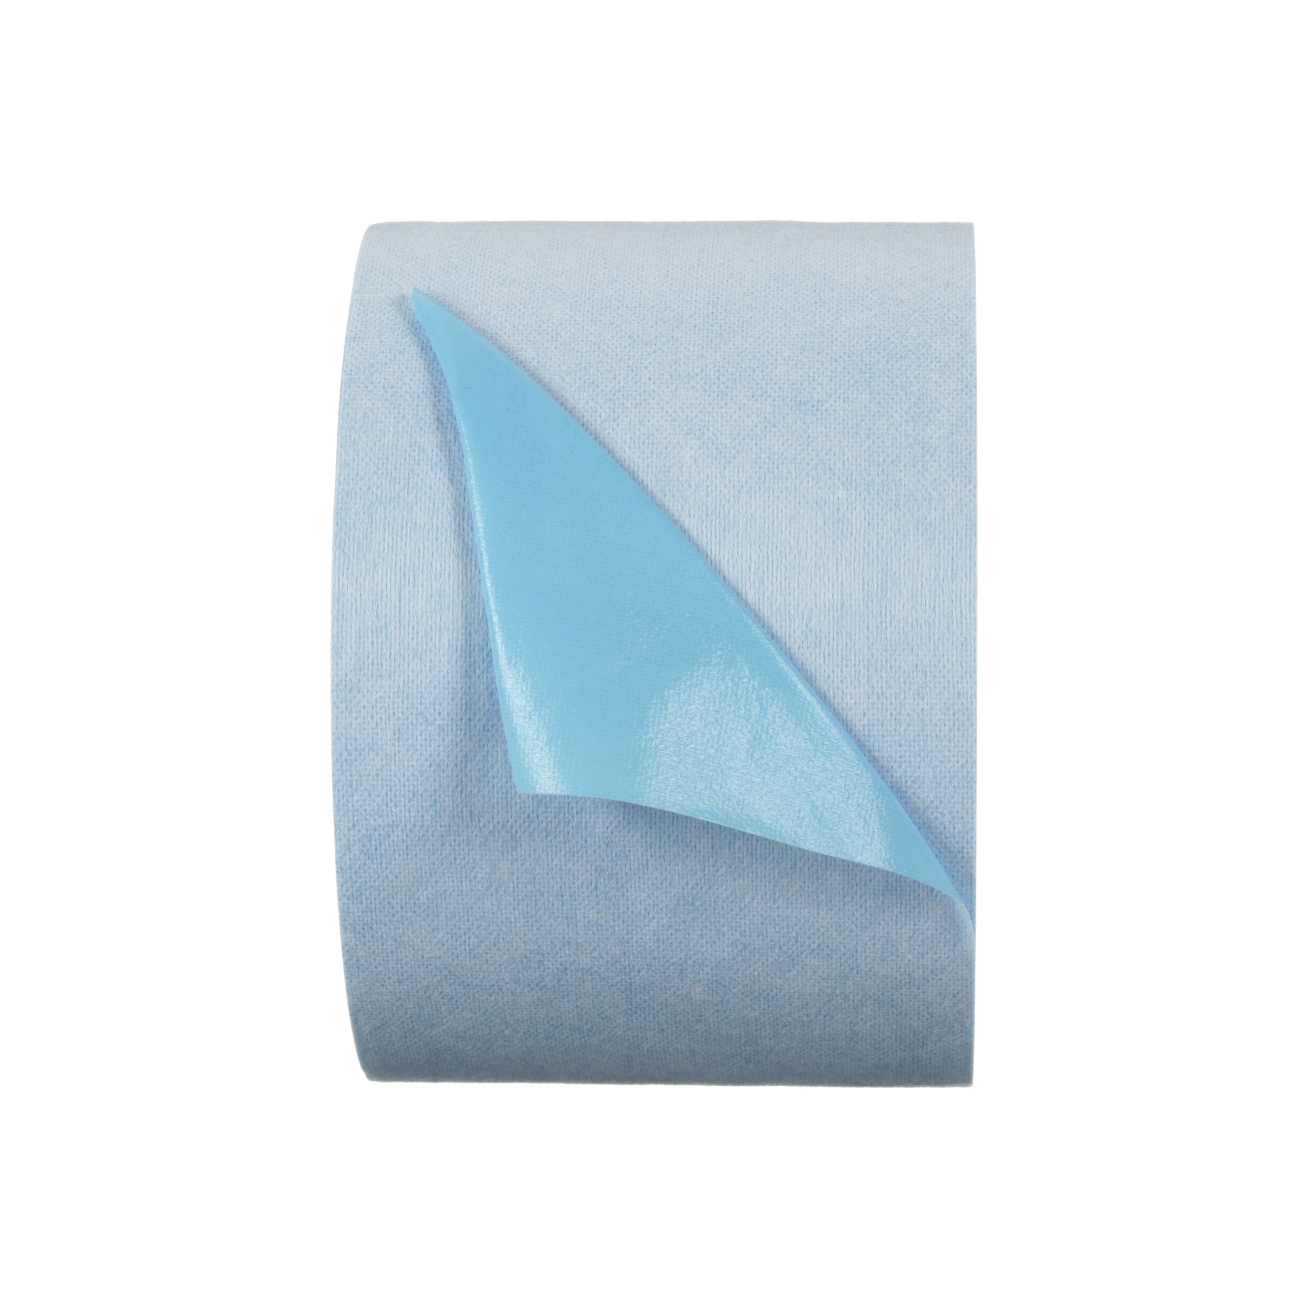 3M Self-adhesive fabric for protection against liquids, 152.4 mm x 91.5 m, 36877